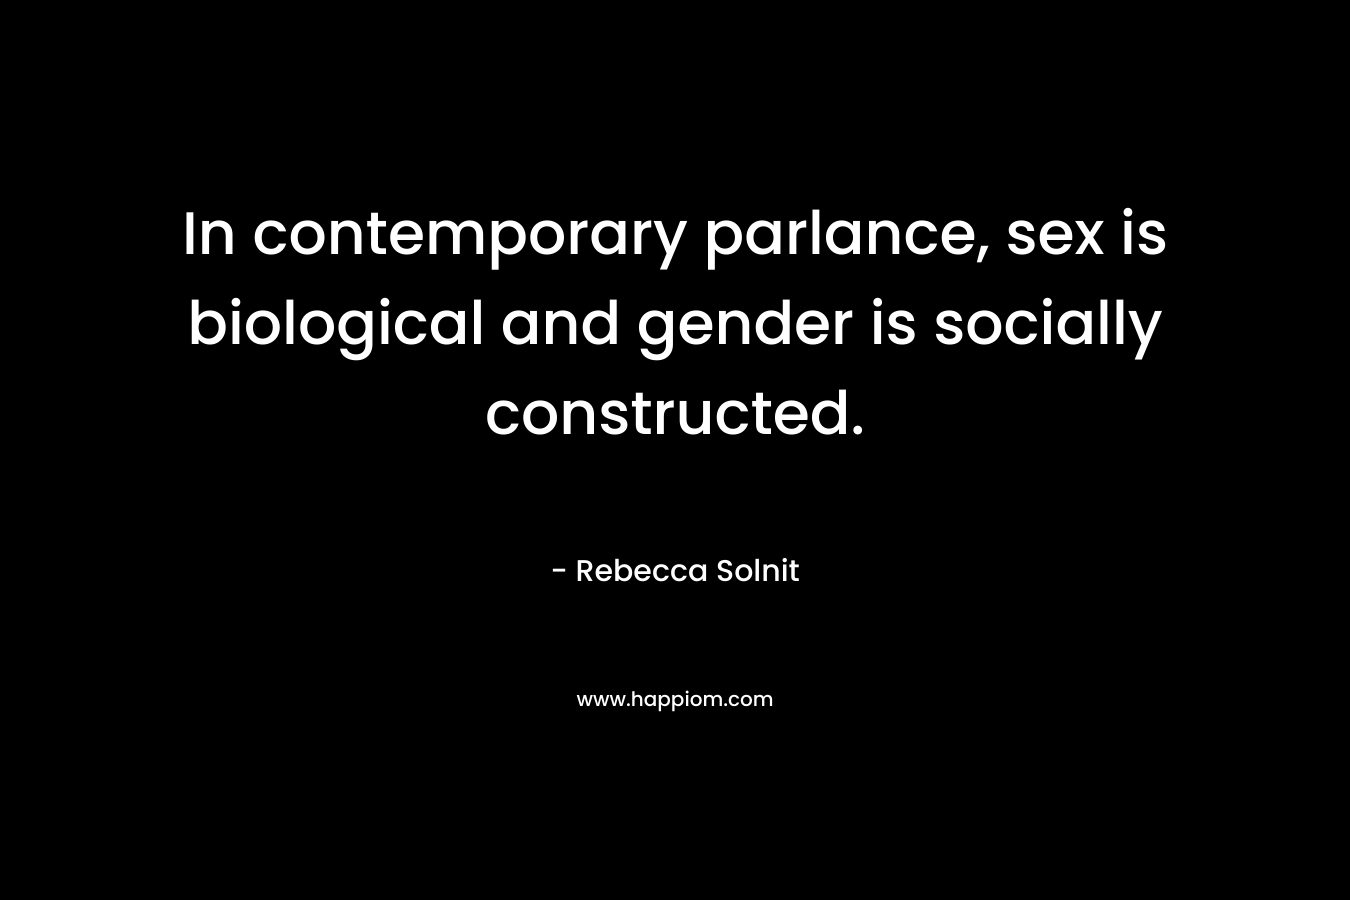 In contemporary parlance, sex is biological and gender is socially constructed.